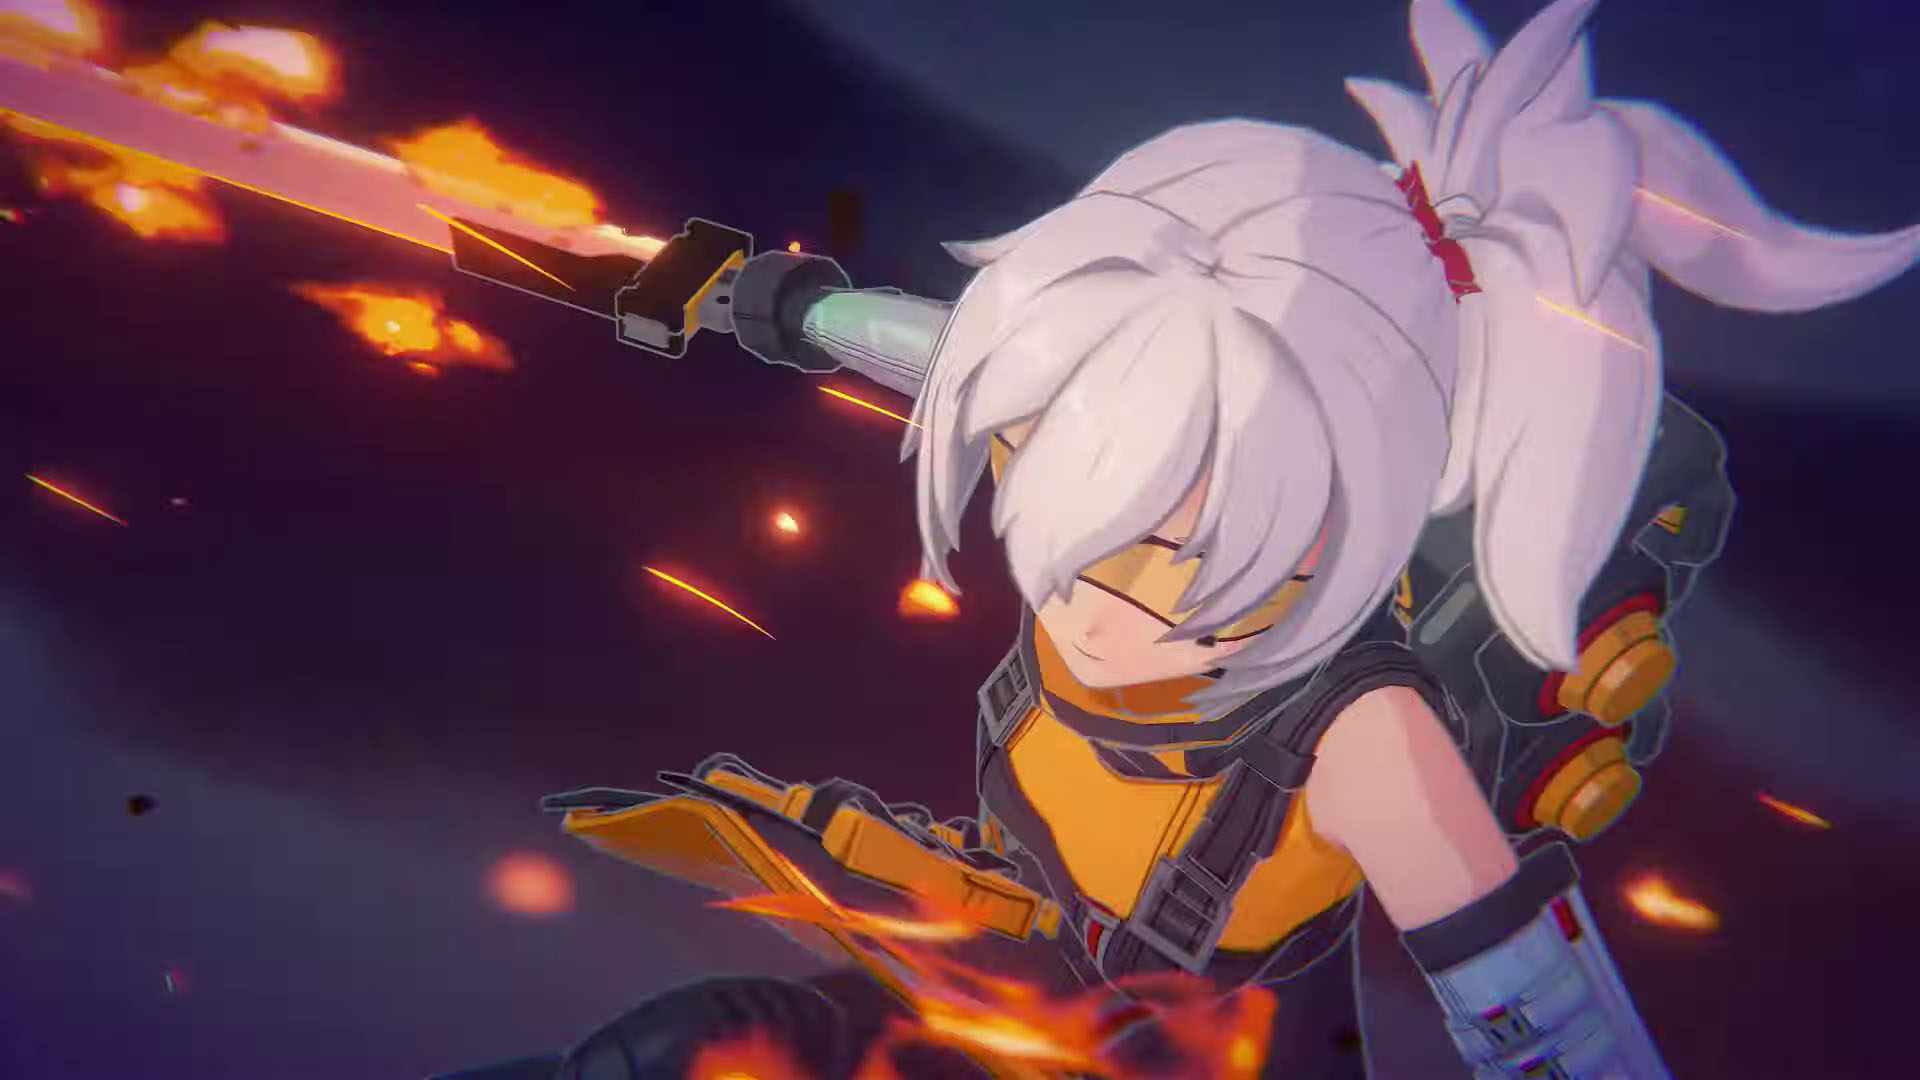 Zenless Zone Zero Unveils Combat Trailer and a New Character - QooApp